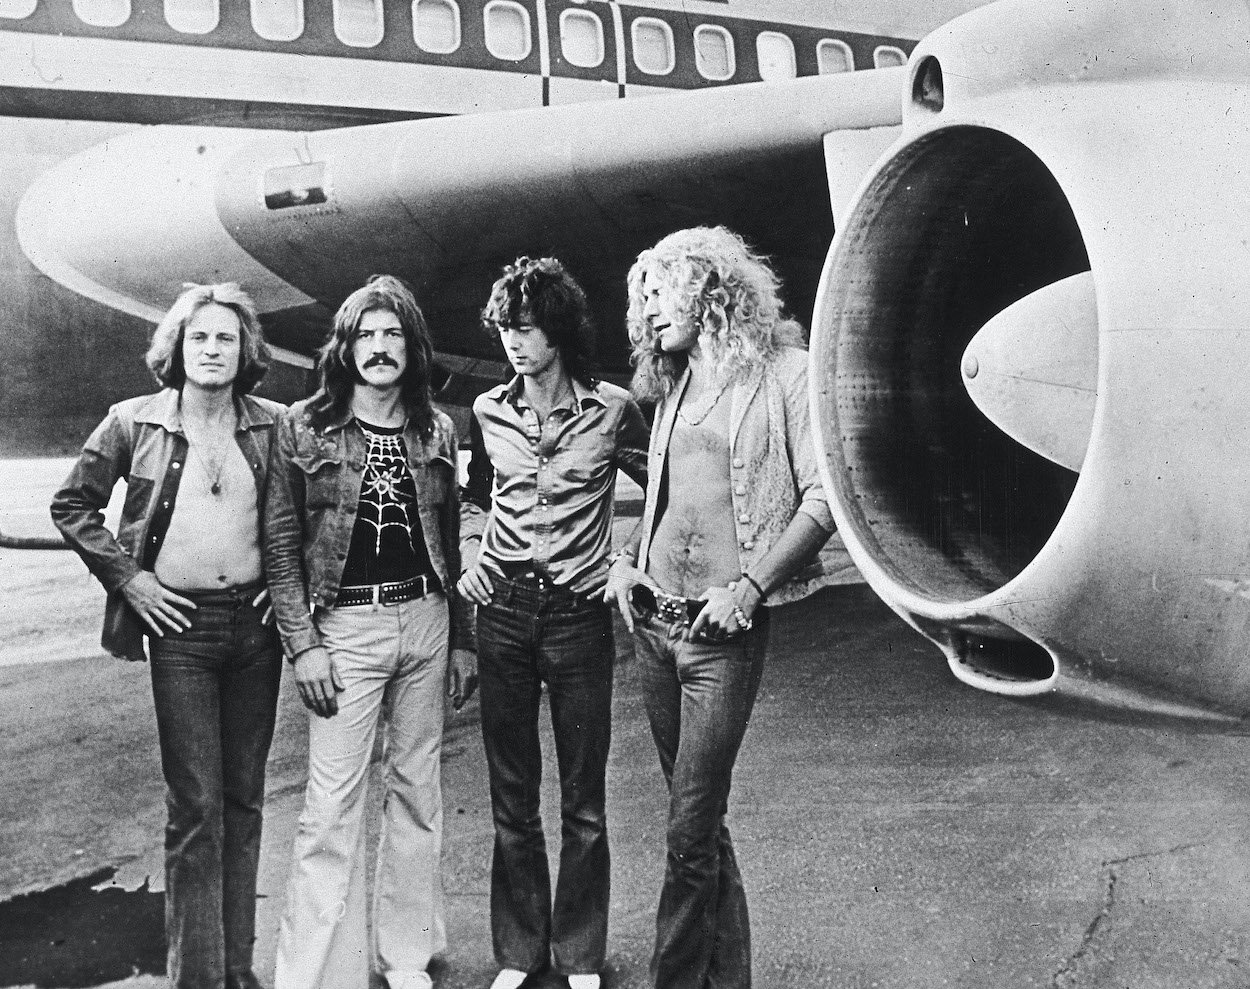 John Paul Jones (from left), John Bonham, Jimmy Page, and Robert Plant stand next to Led Zeppelin's airplane dubbed The Starship, which they didn't own.